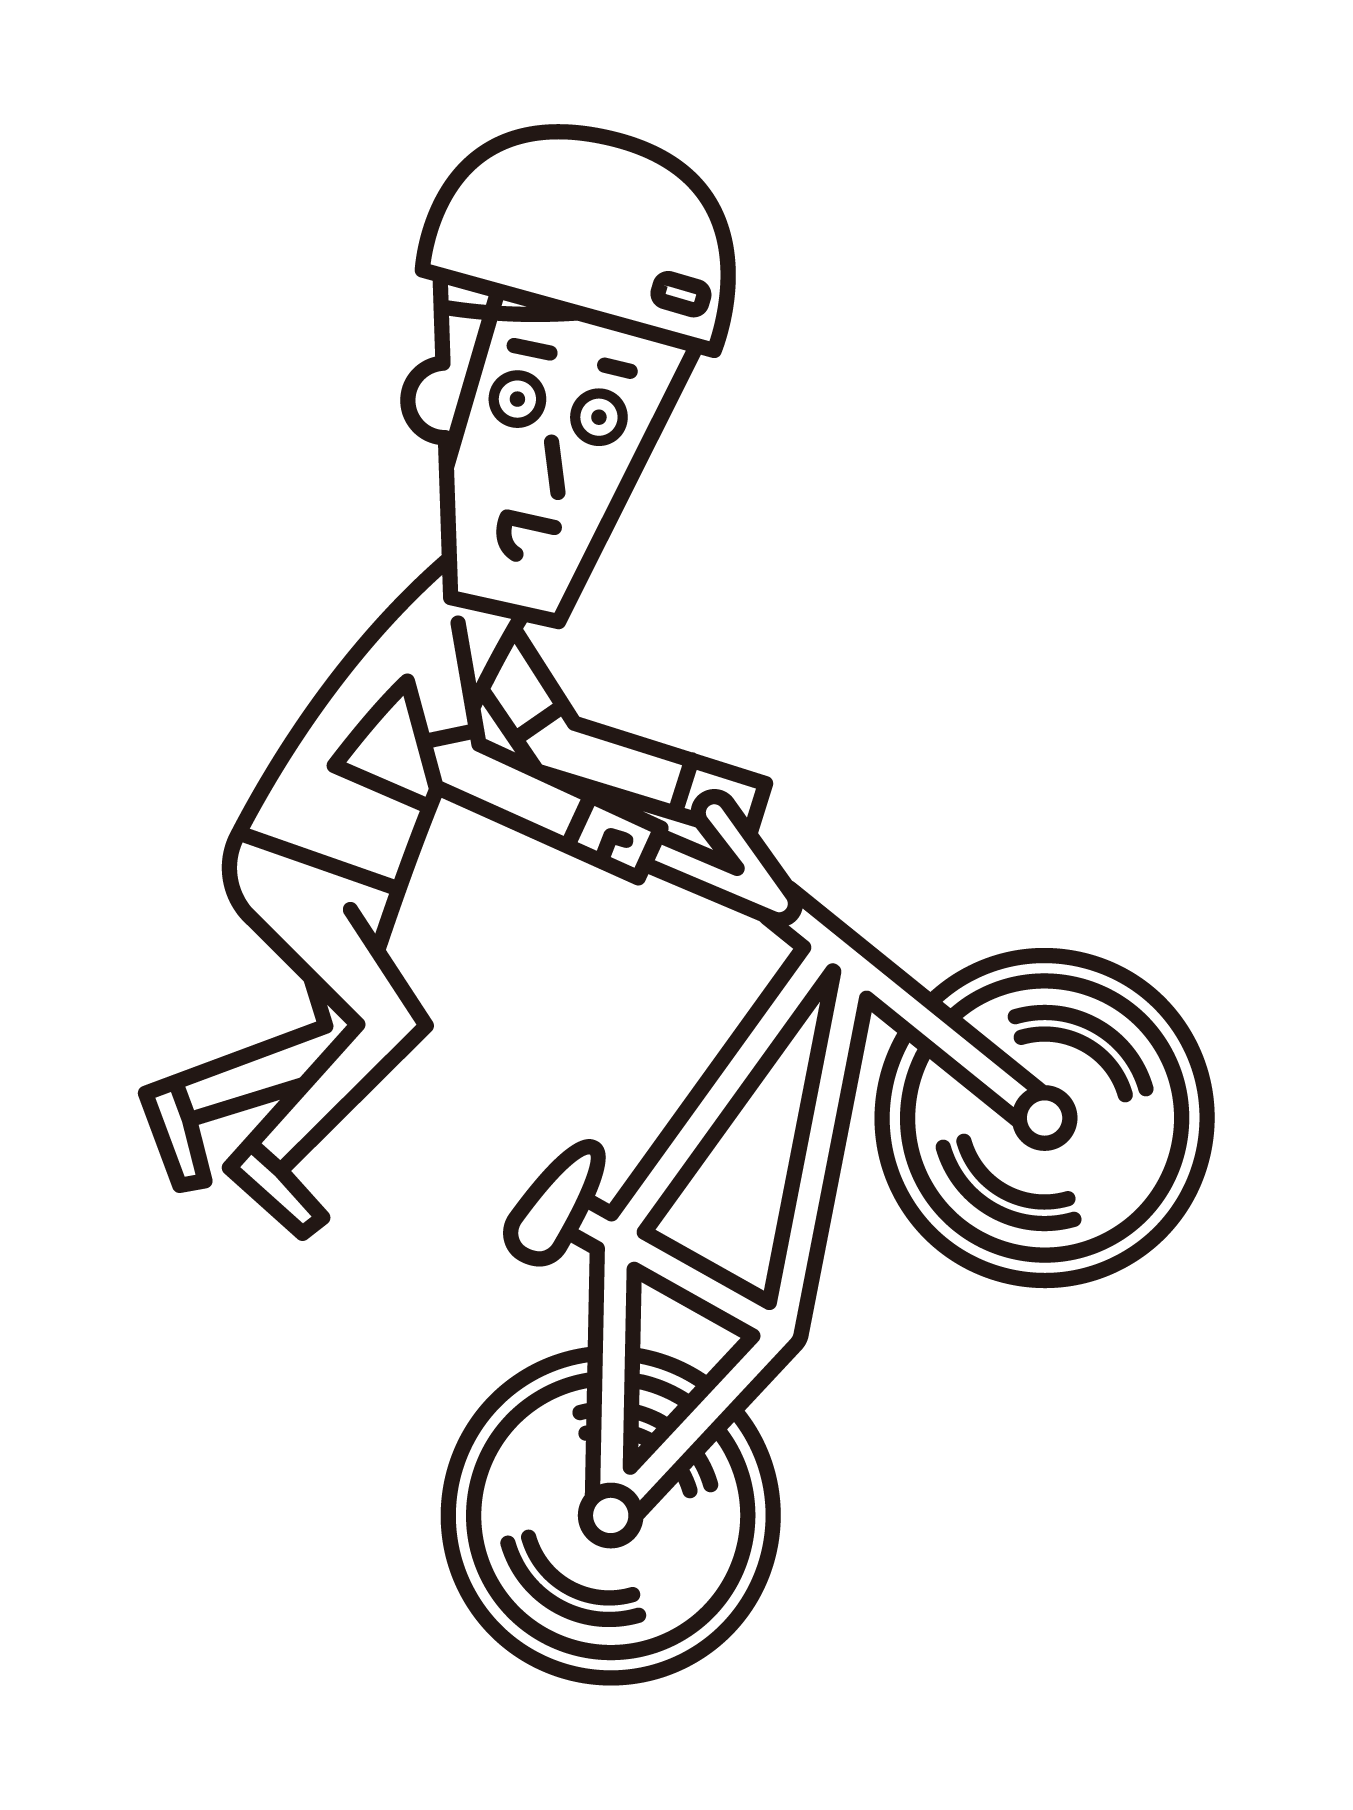 Illustration of a BMX player (male) jumping with his body floating in the air